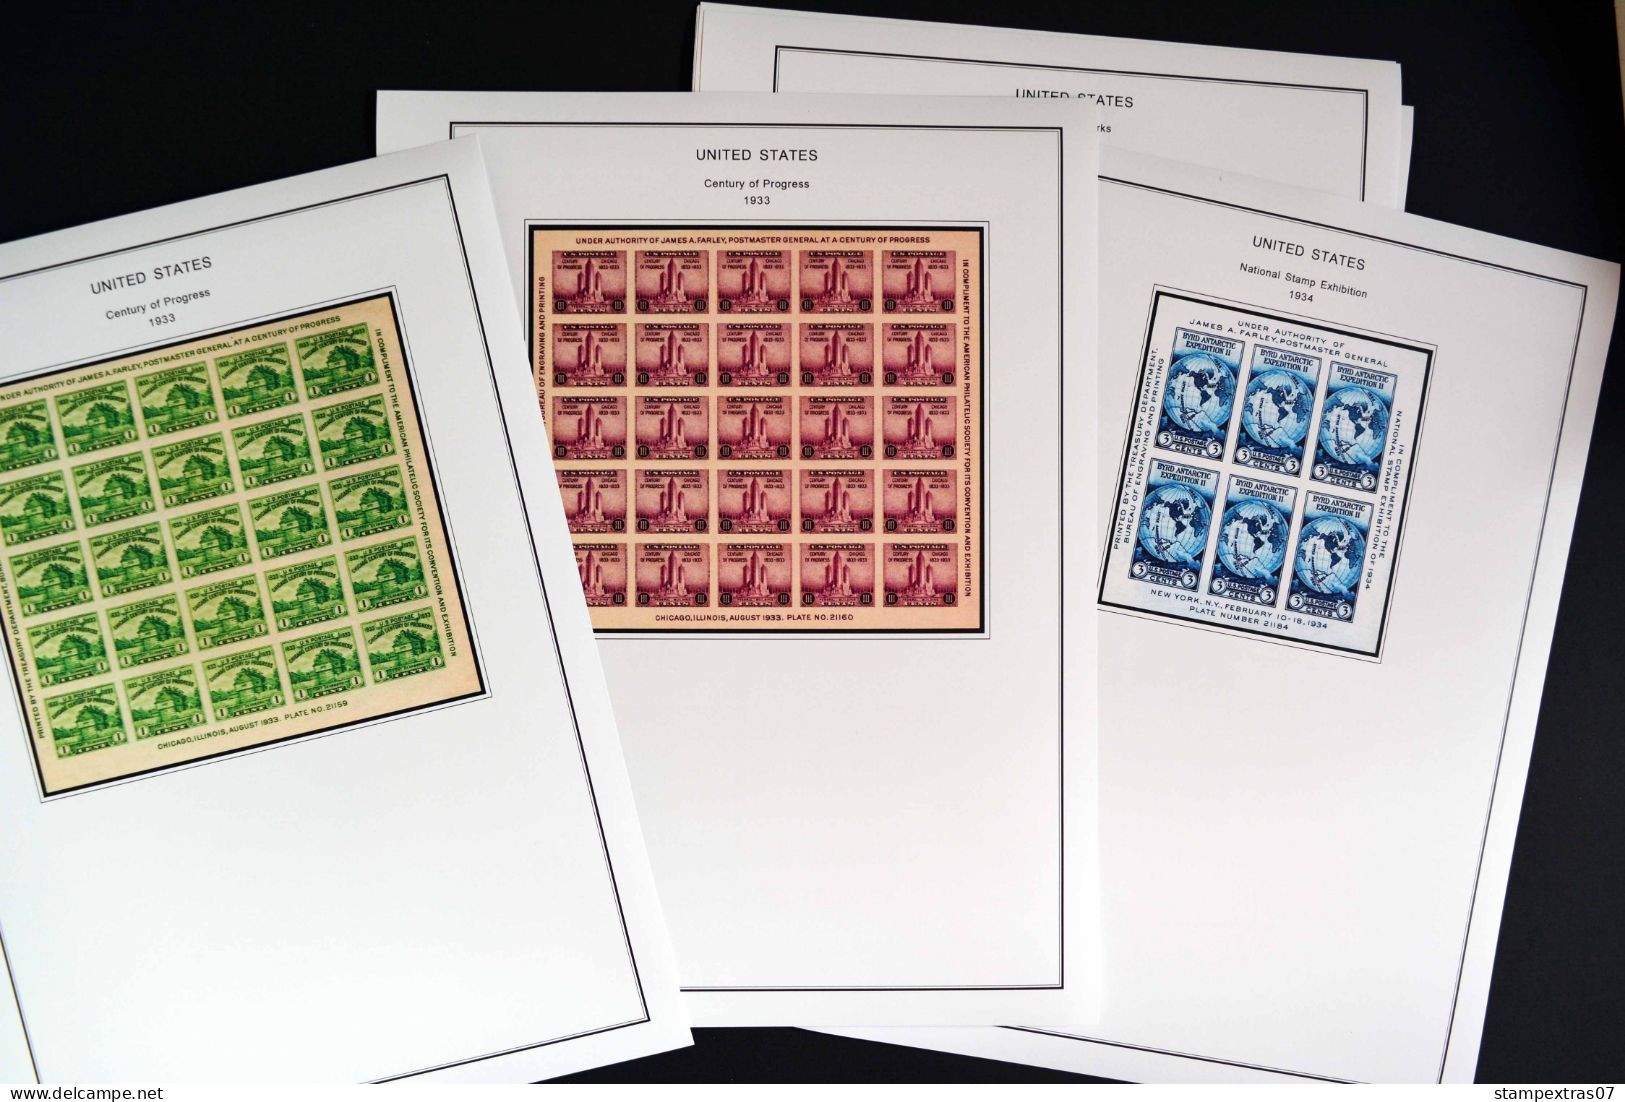 COLOR PRINTED USA 1920-1965 STAMP ALBUM PAGES (66 illustrated pages) >> FEUILLES ALBUM